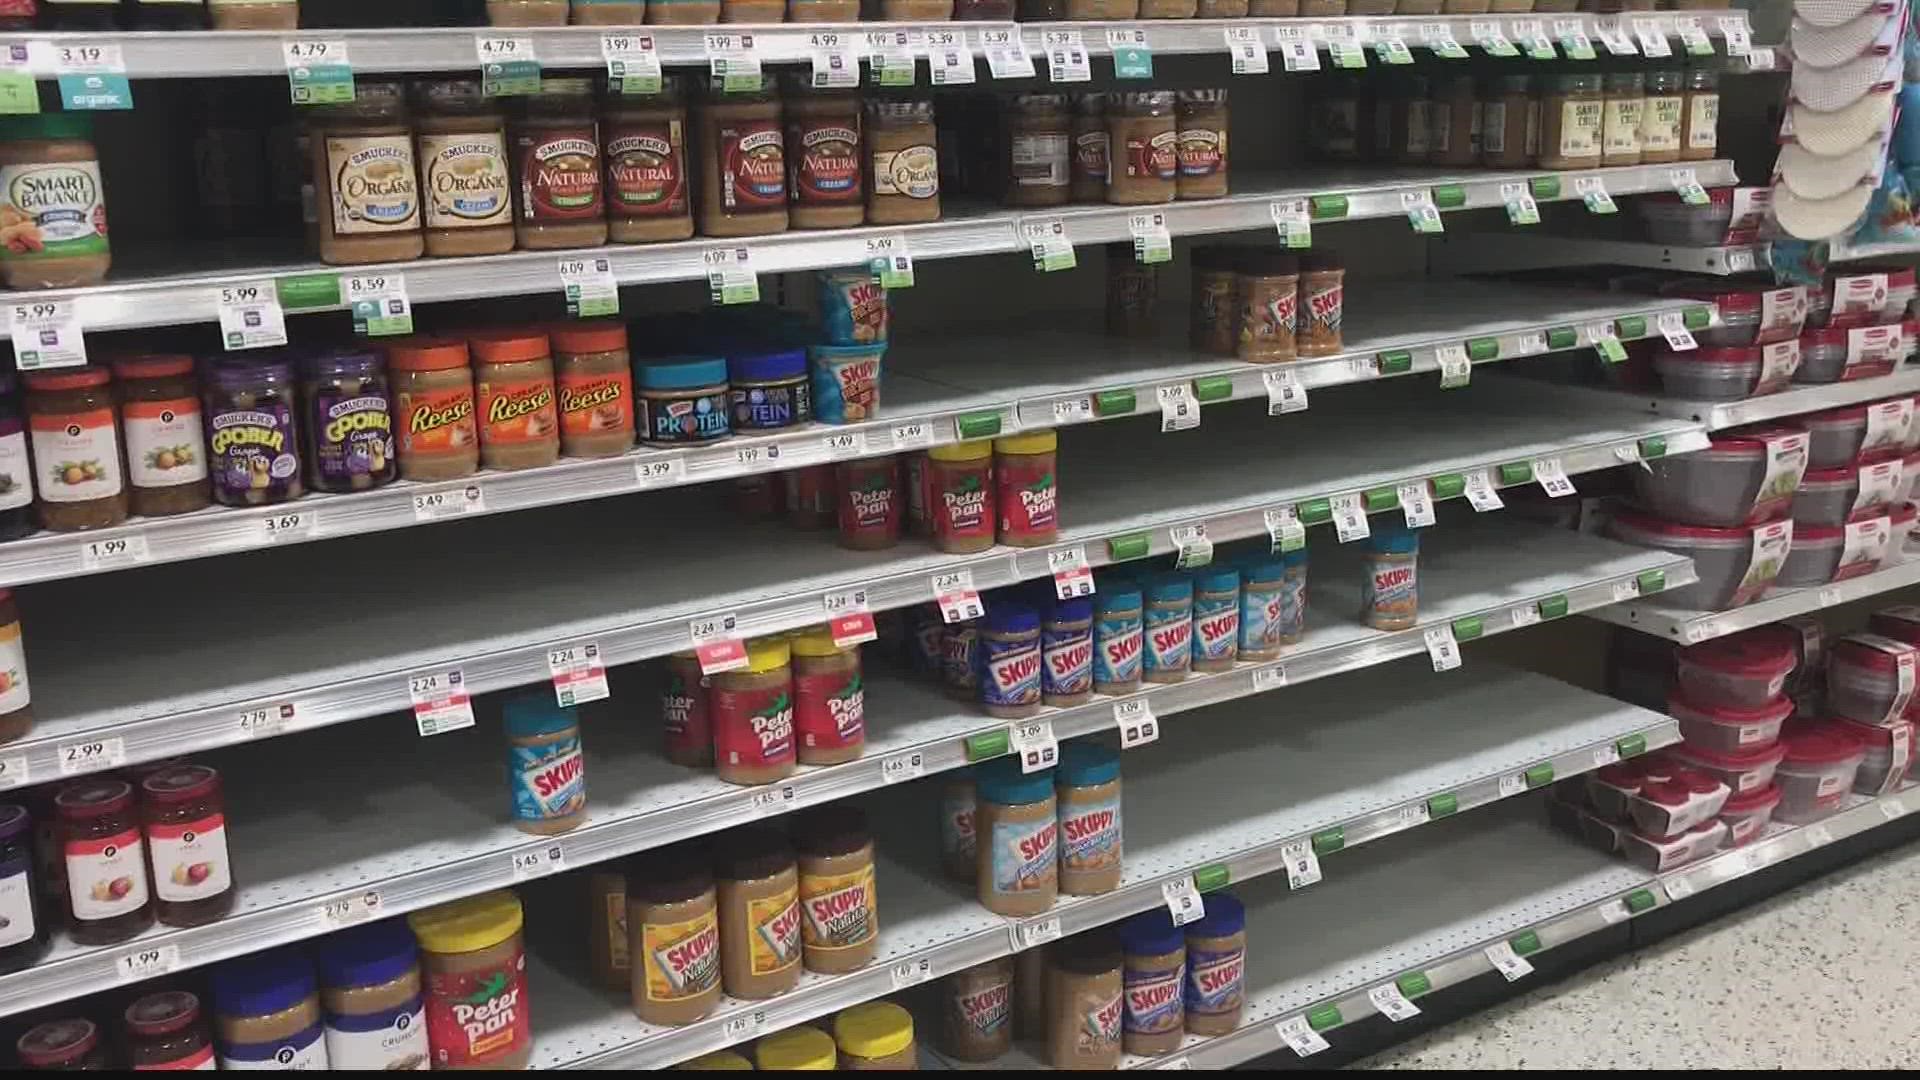 11Alive's Joe Ripley did some comparison shopping and worked to find you the best deals.